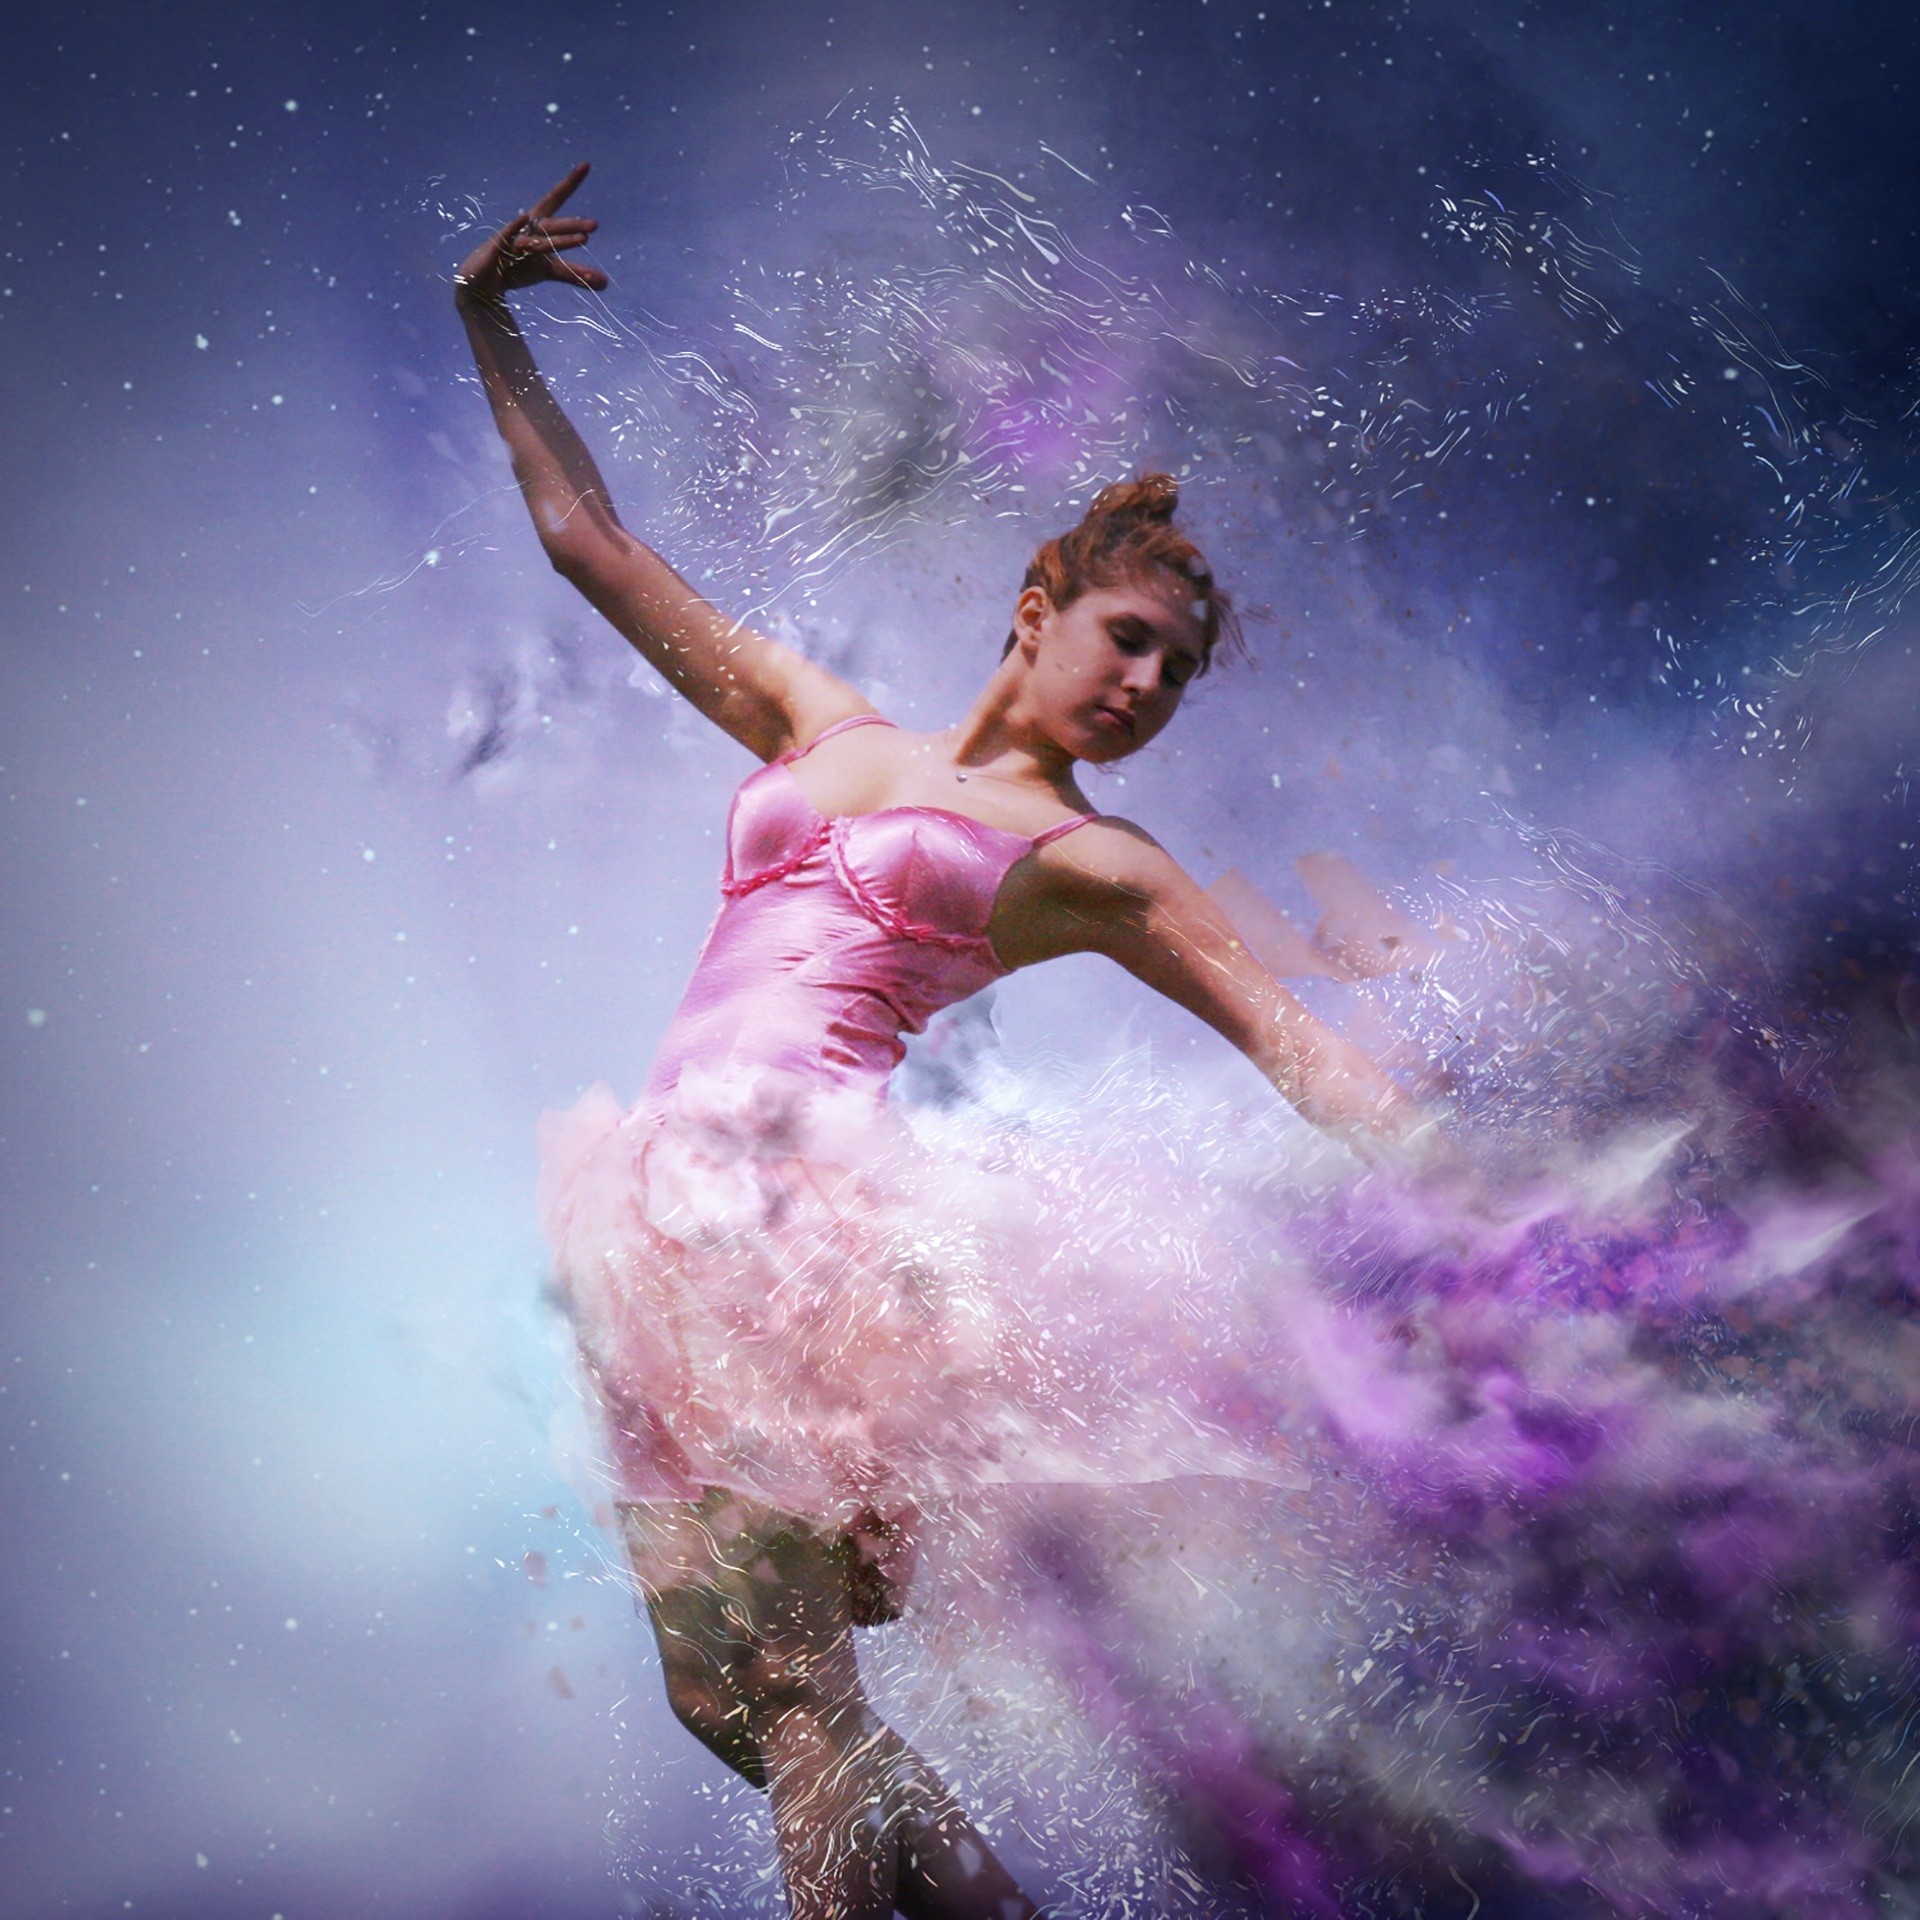 1920x1920 Free Images : water, person, sky, girl, woman, purple, atmosphere, motion,  female, young, space, human, fashion, ballerina, ballet, dancer, fun,  classical, ...